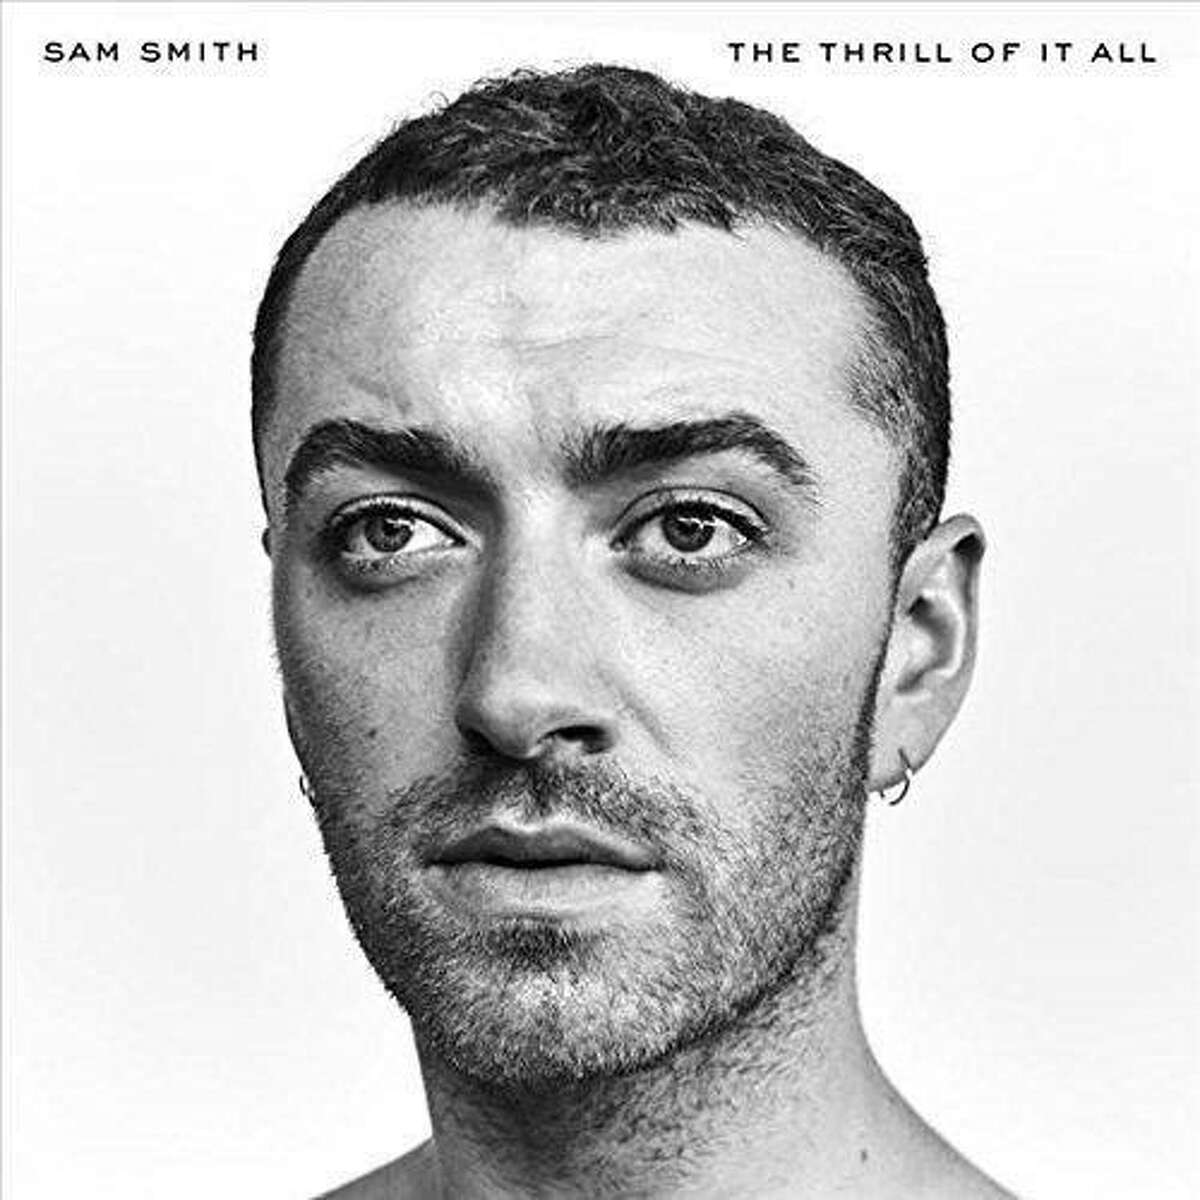 "The Thrill of It All" by Sam Smith (Amazon)